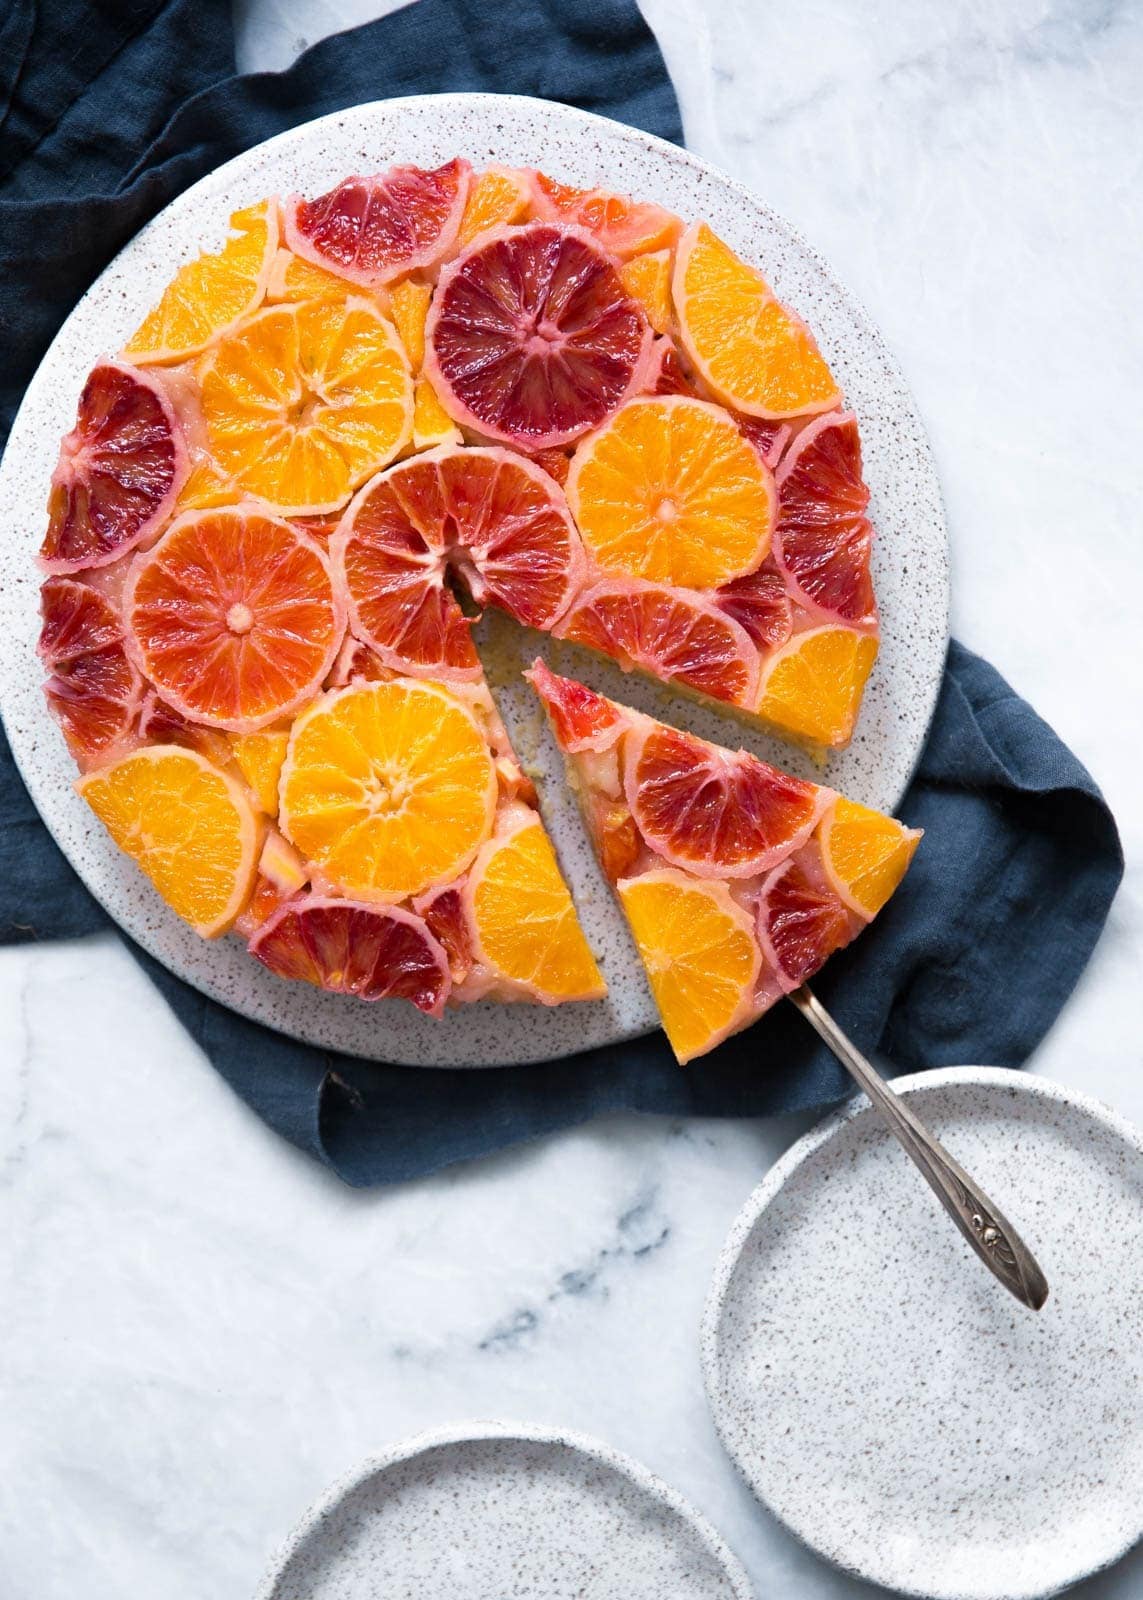 Upside down cake topped with blood oranges, navel oranges, and tangelos.